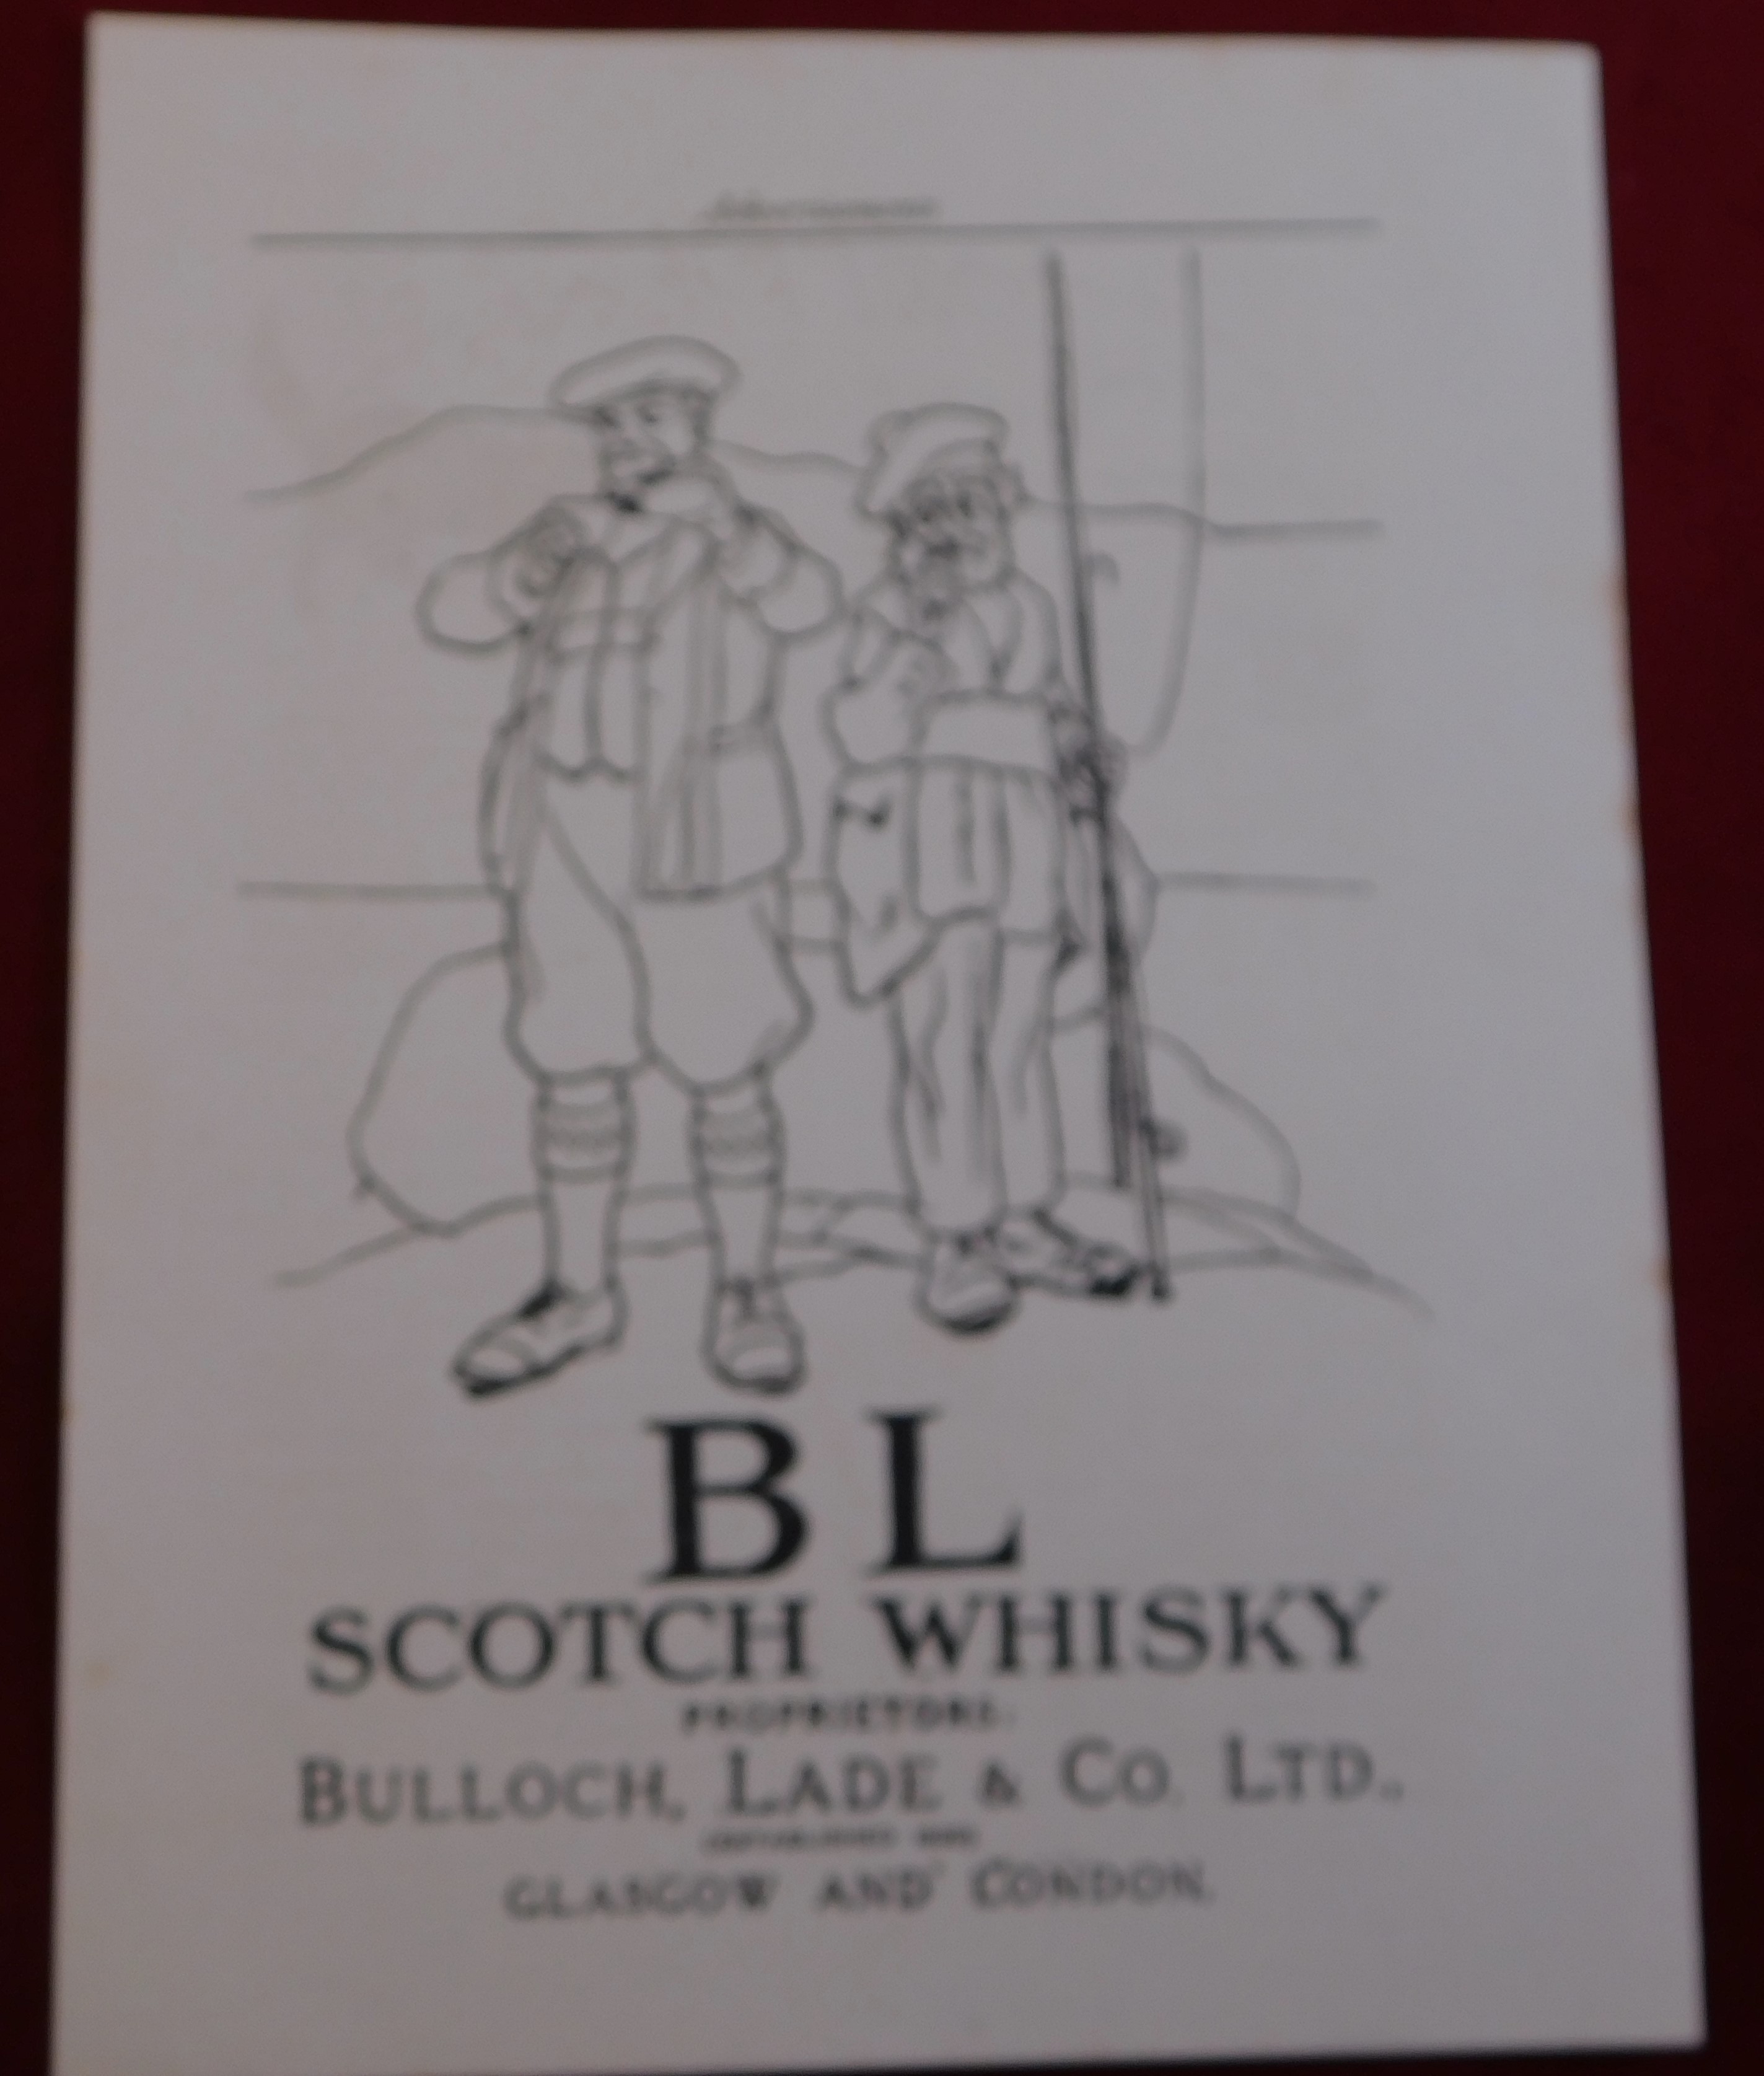 Bolloch, Lade Scotch Whisky - Full page black and white, |Printer Pie Adverttisement, scarce 20cm